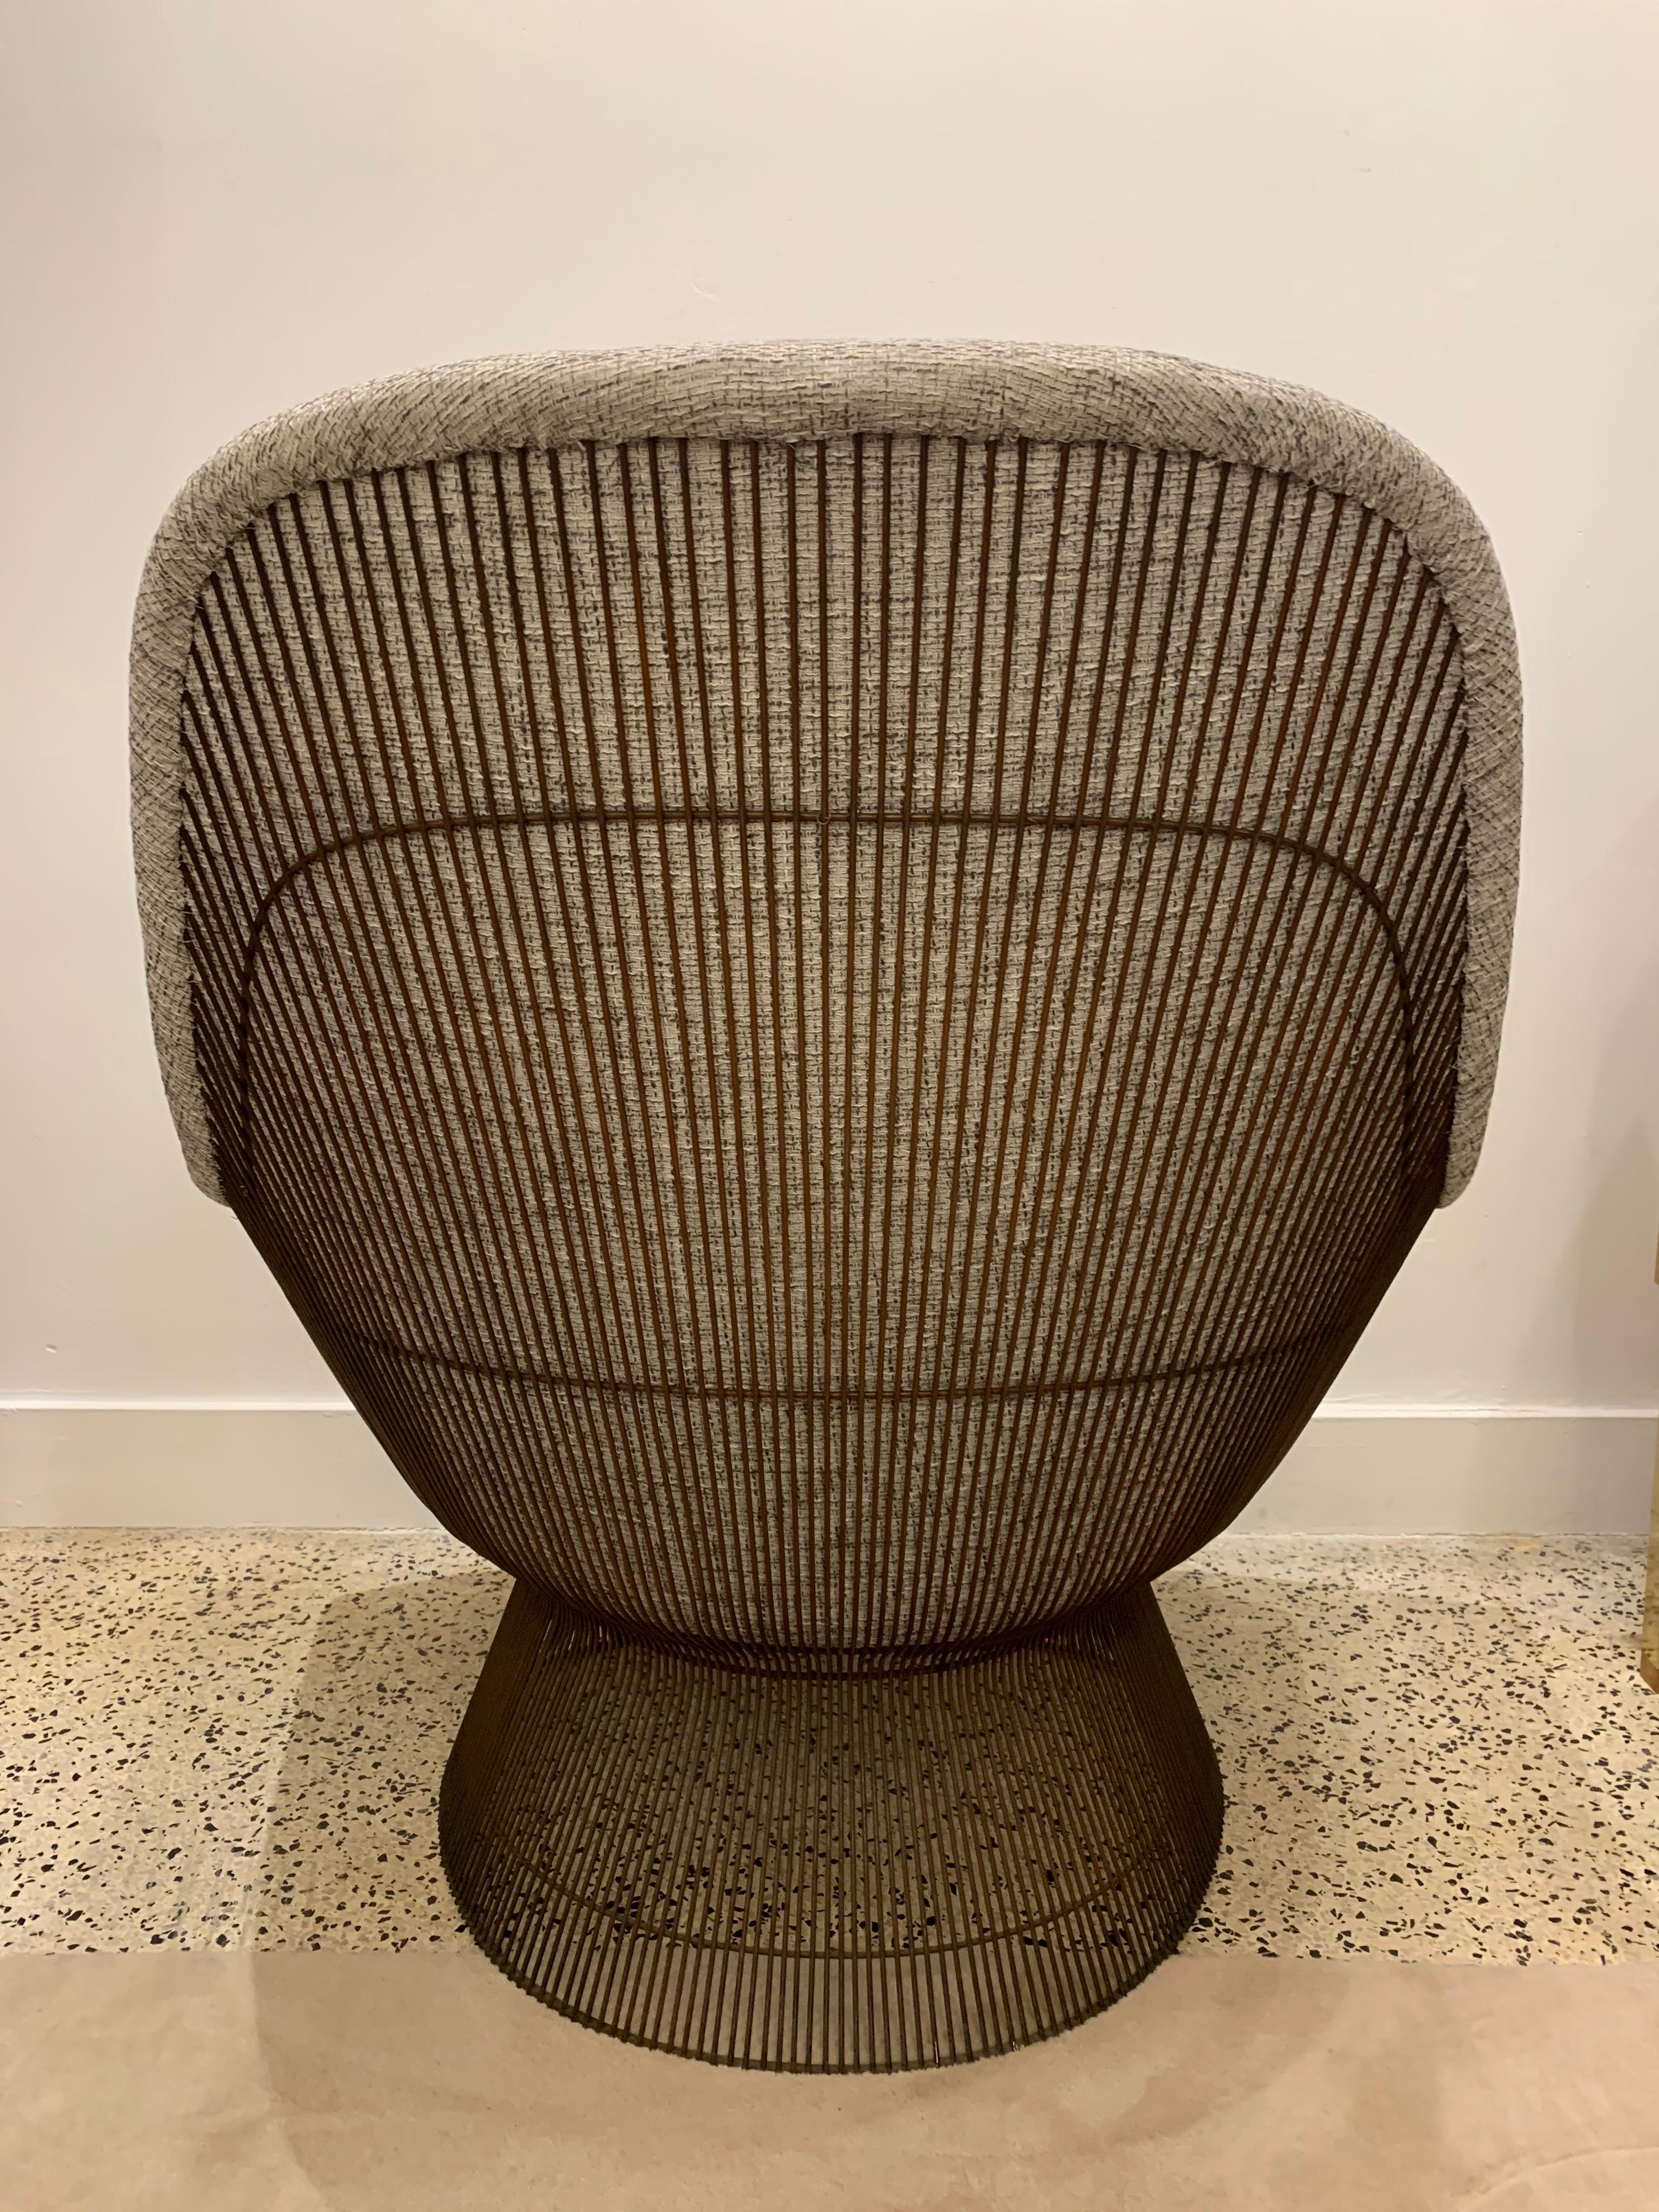 A bronze-steel frame and newly upholstered in this bright tweed wool/cotton blend fabric, this 'model 1705' lounge chair with ottoman by Warren Platner in 1966 for Knoll International. This iconic easy chair by Platner is created by welding curved